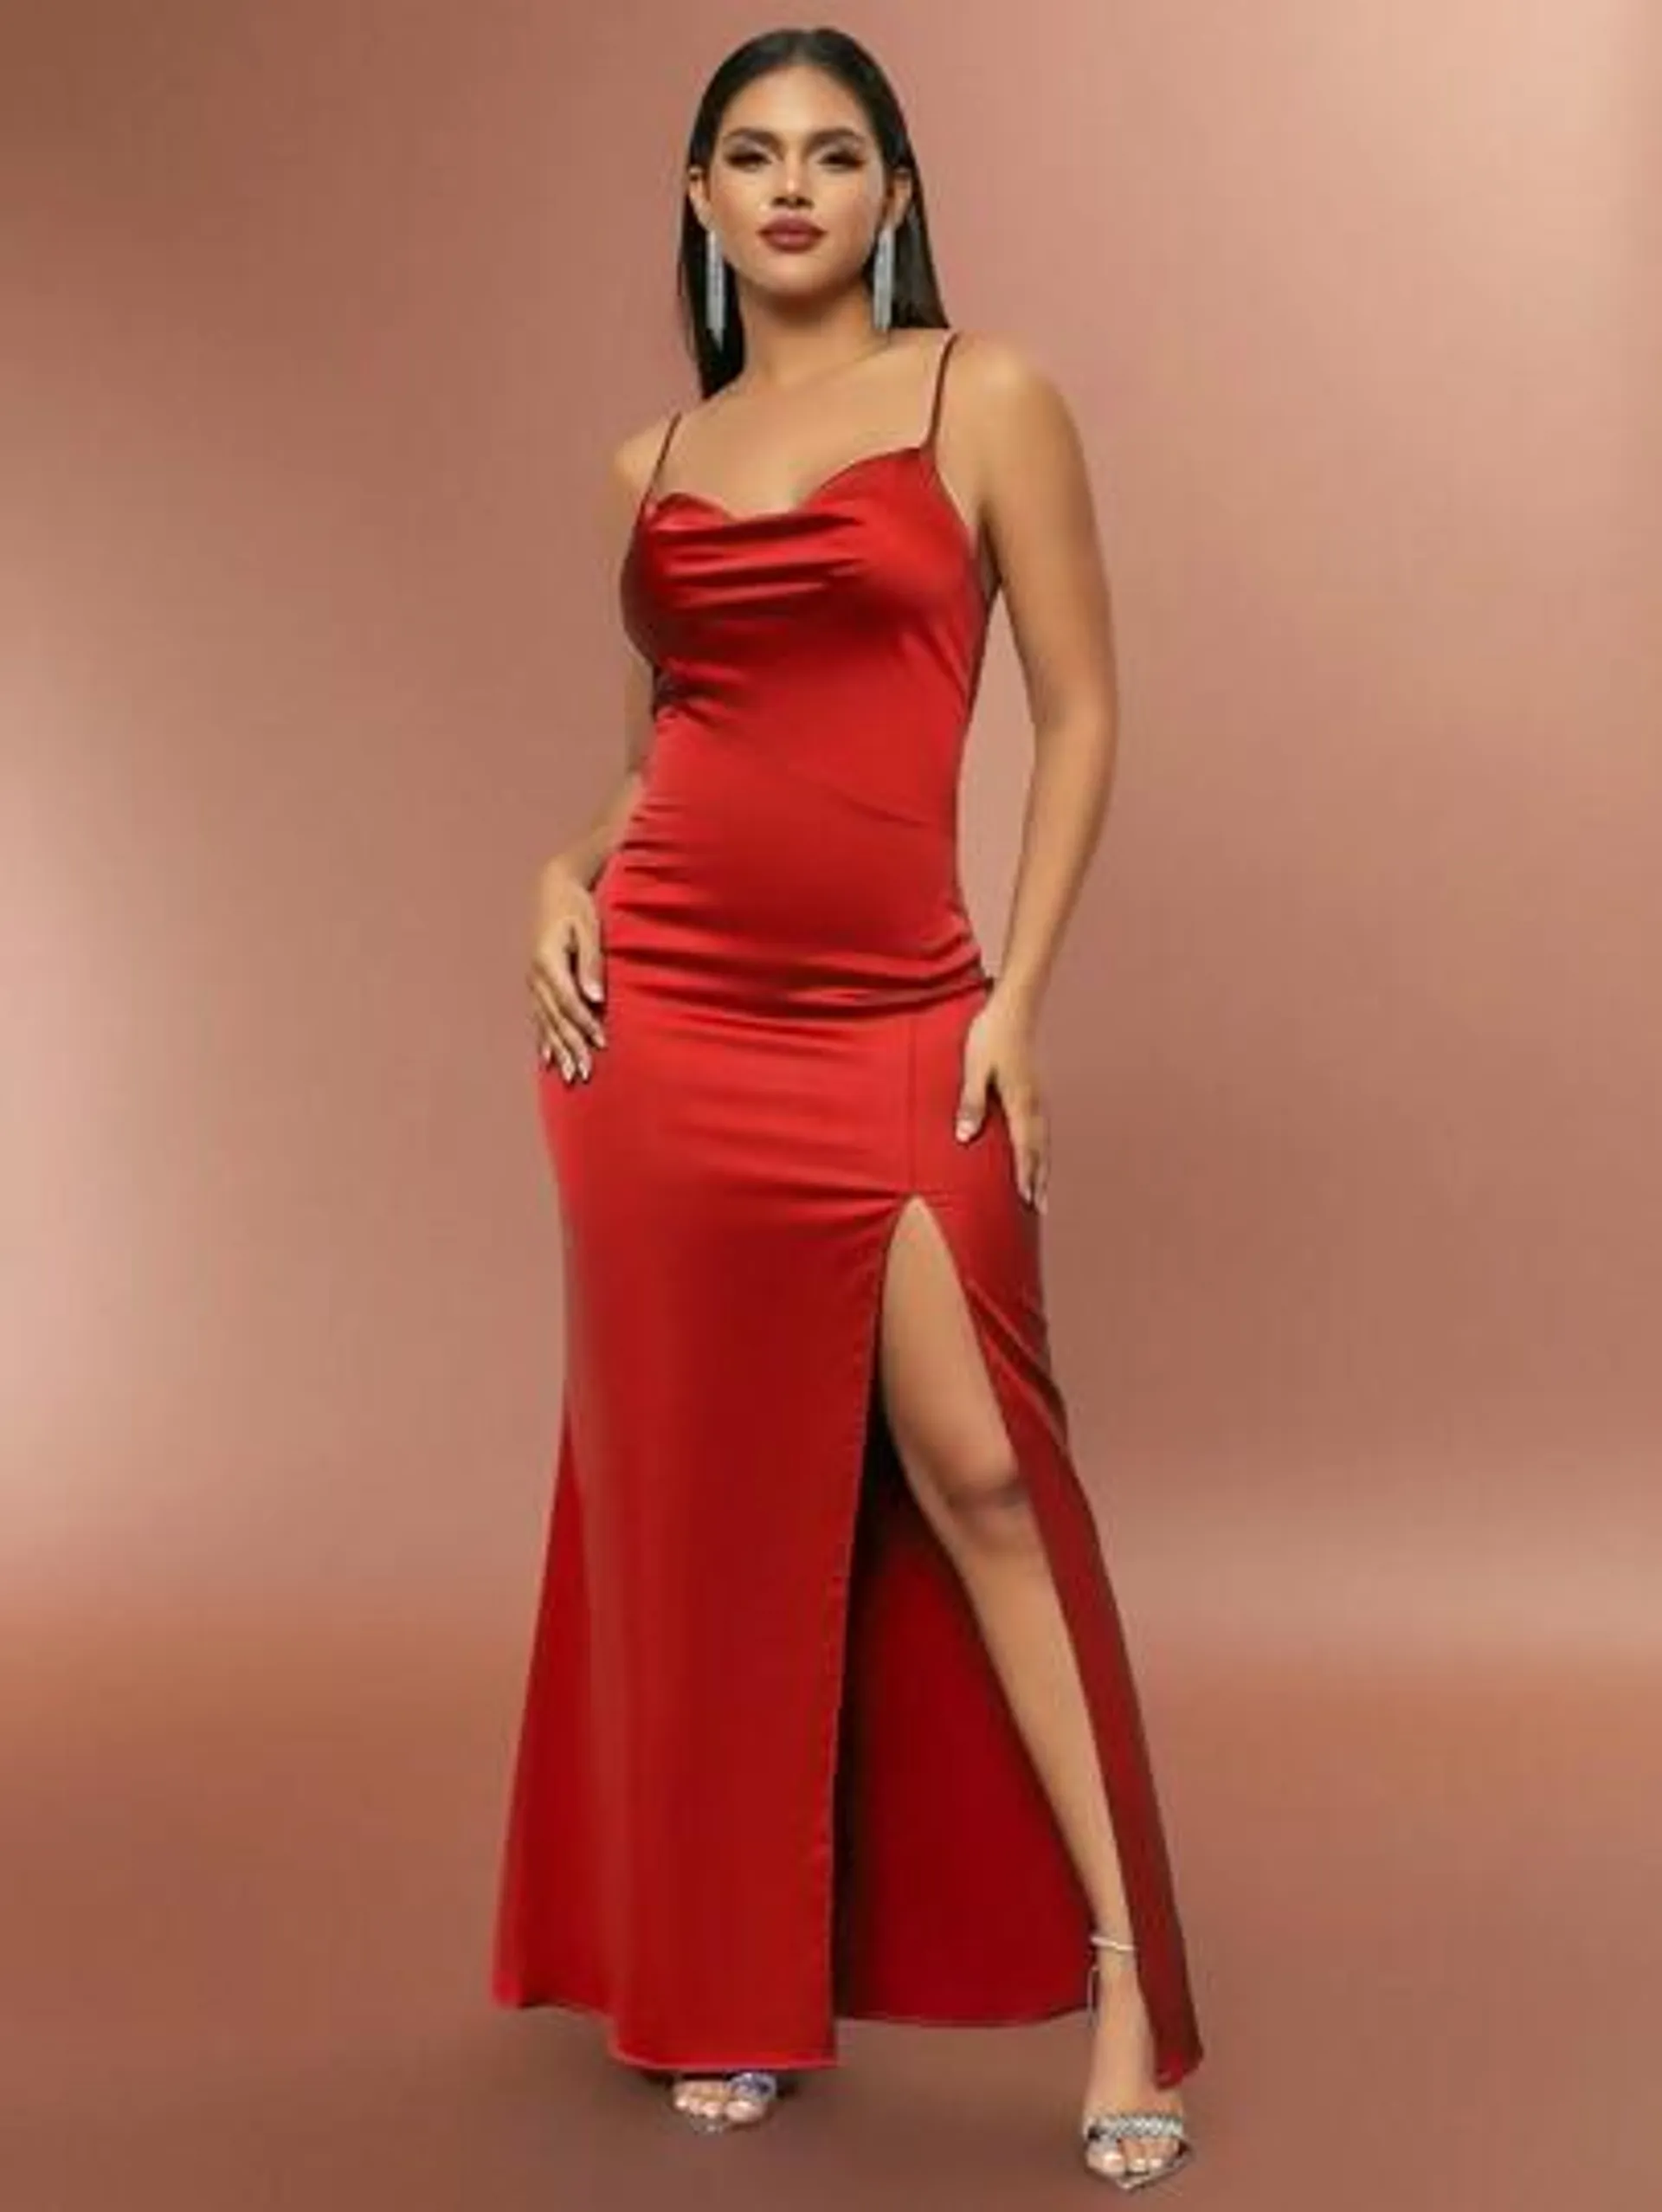 D&M Slim Fit Halter Neck Side Slit Sleeveless Sequin Evening Gown Dress With Open Back For Women